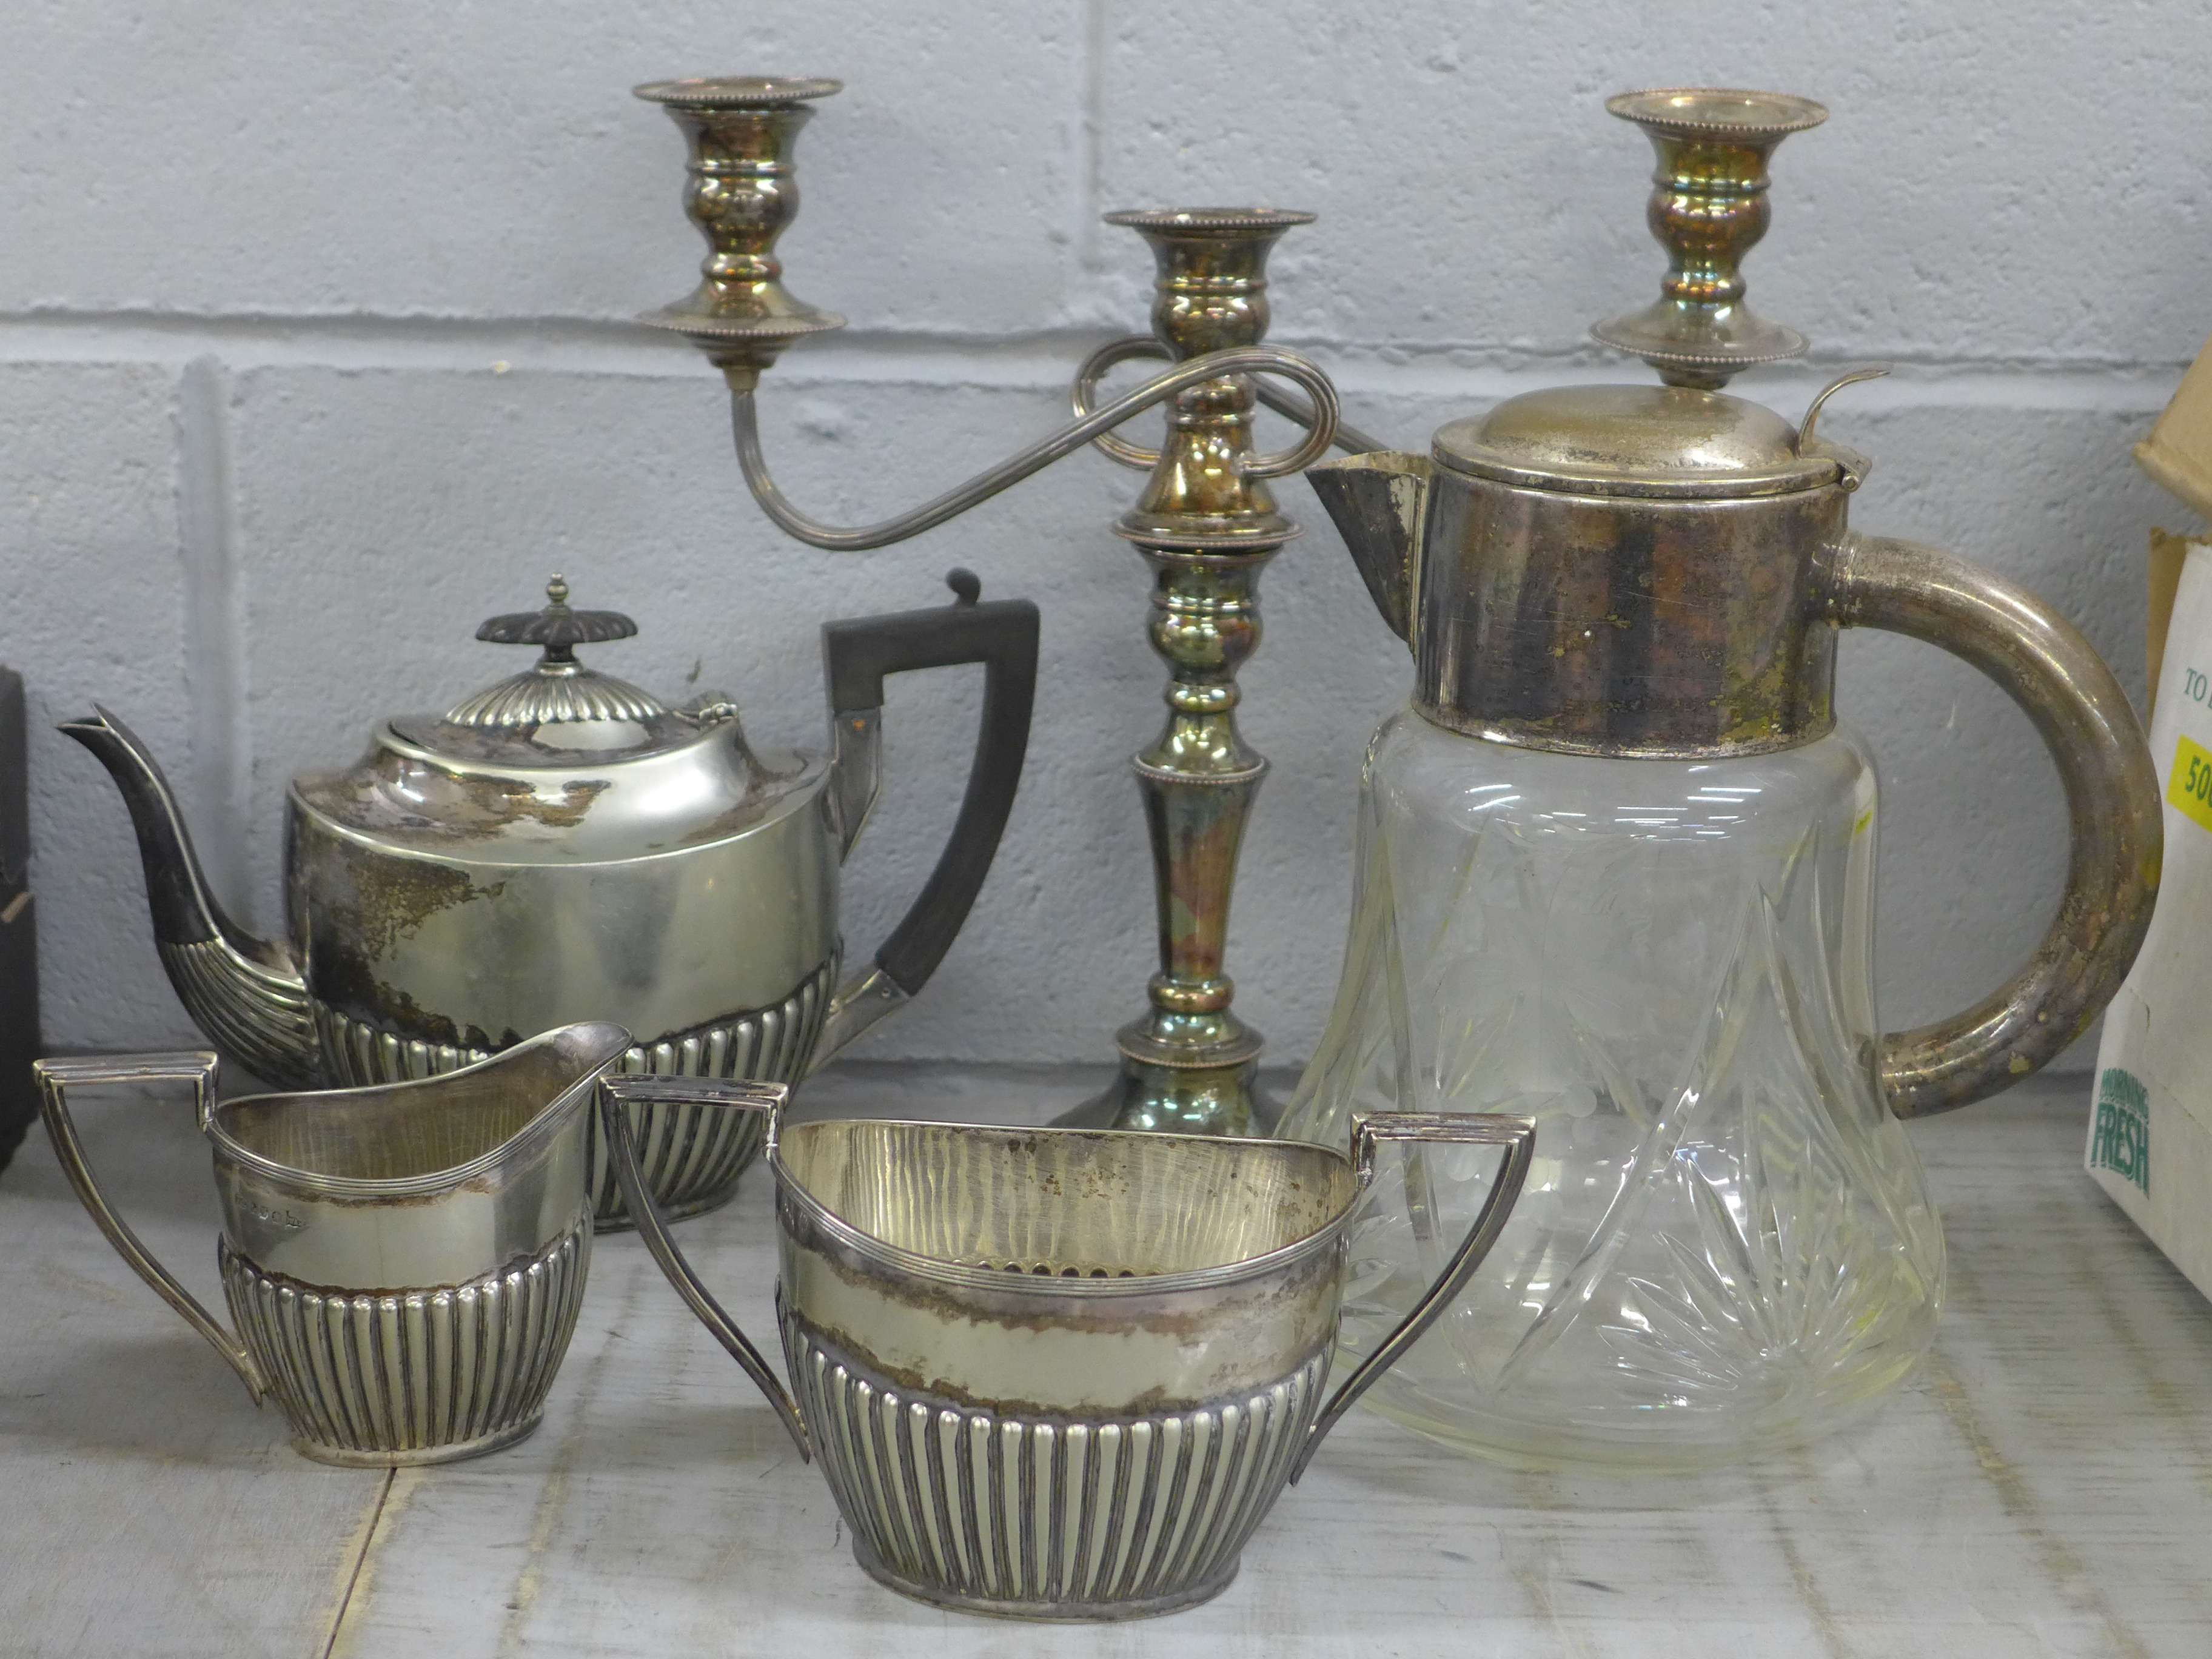 A collection of plated ware including a Walker & Hall teapot, sugar bowl and milk jug, and a